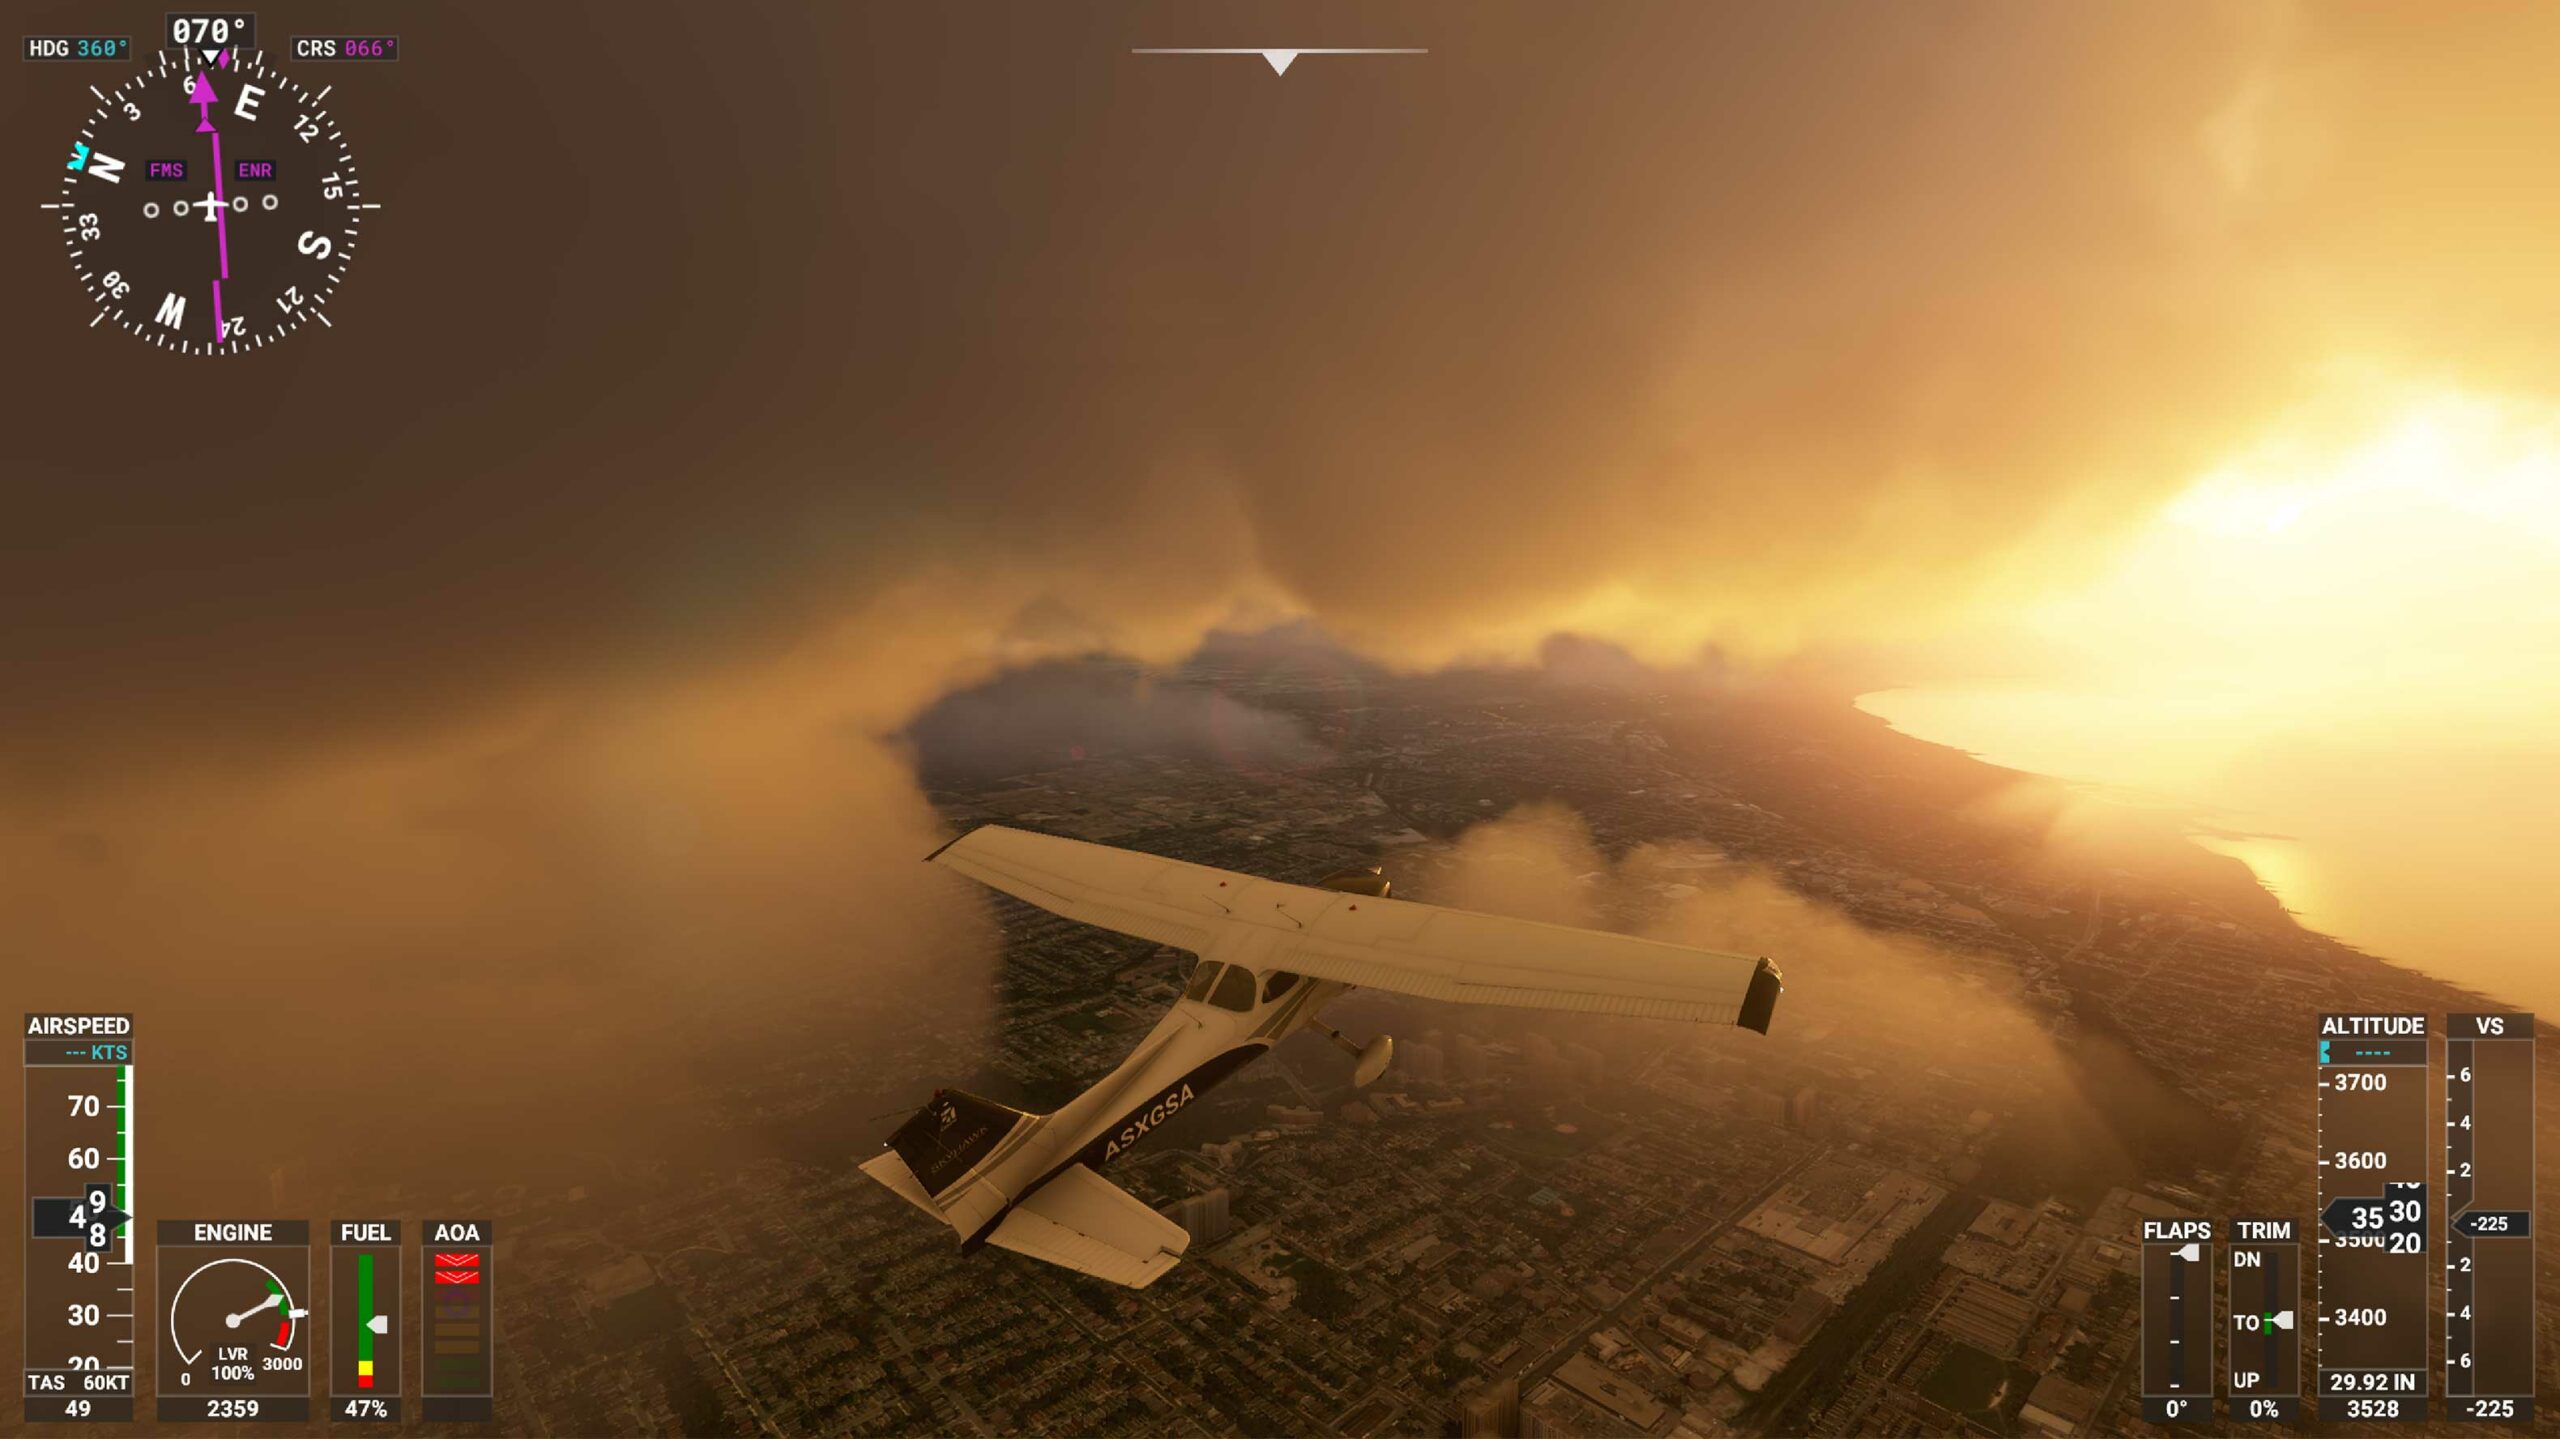 Microsoft Flight Simulator Players Are Swapping Out Bing for